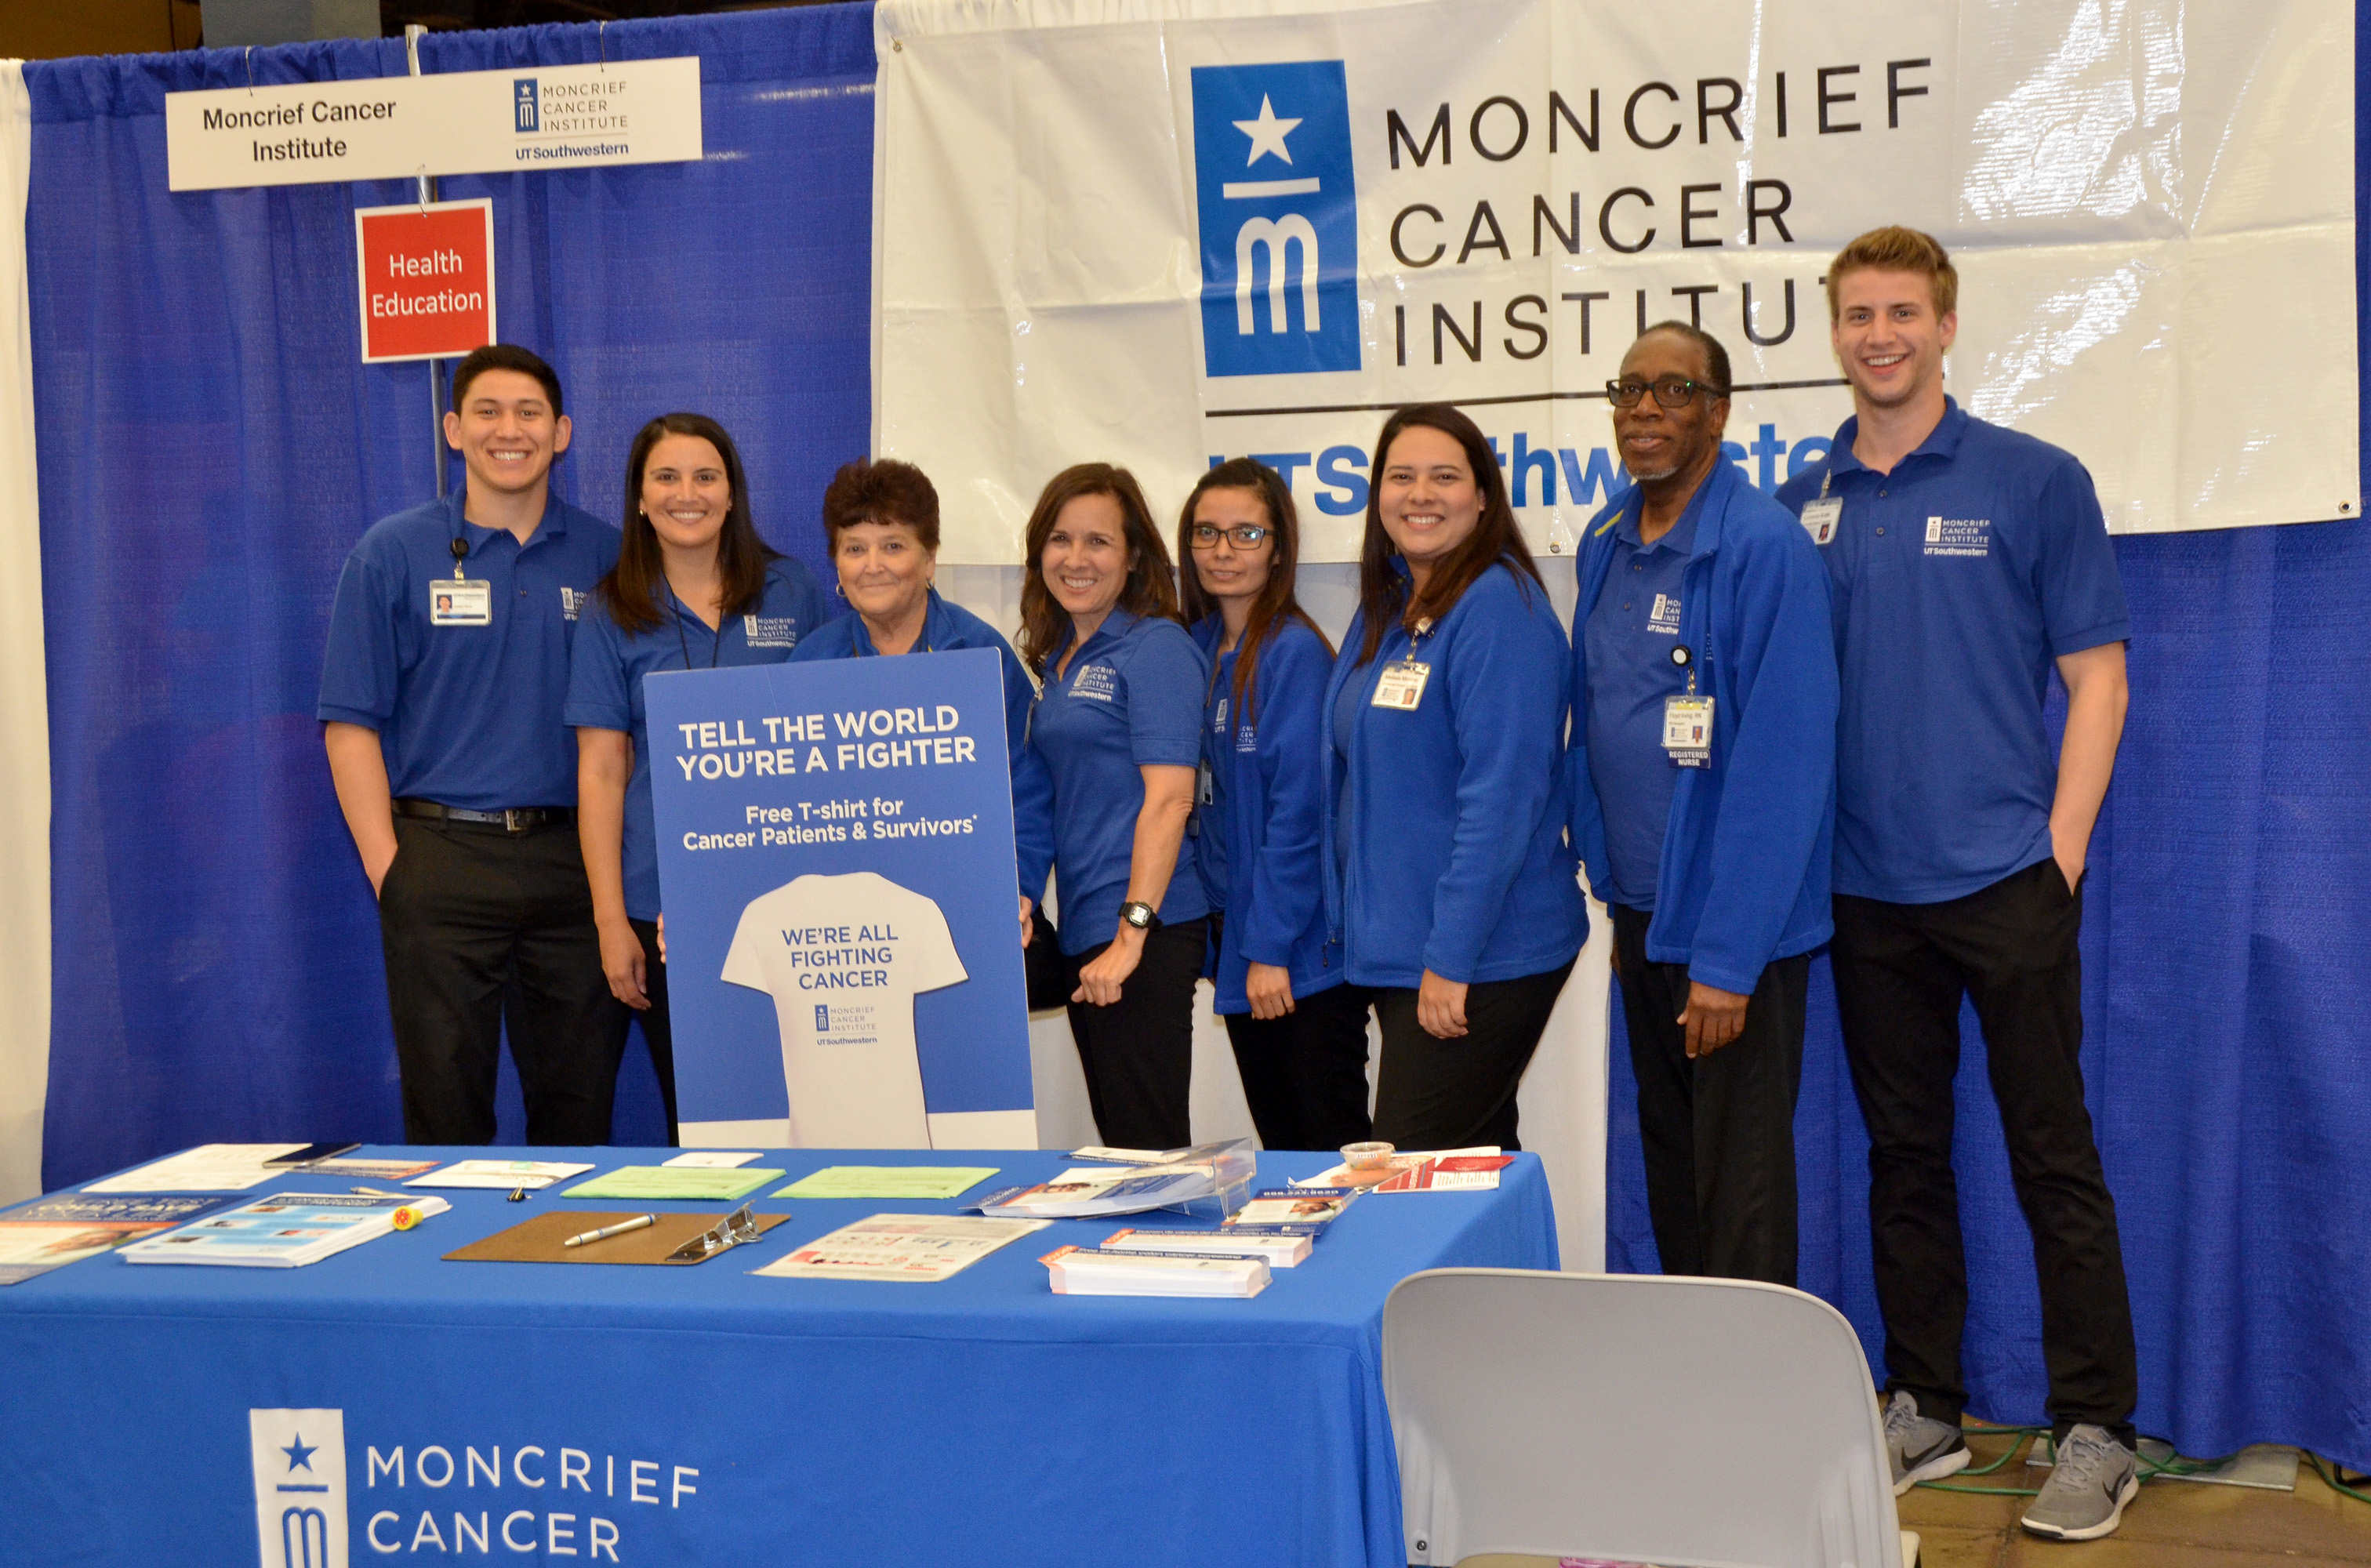 Moncrief Cancer Institute Booth photo